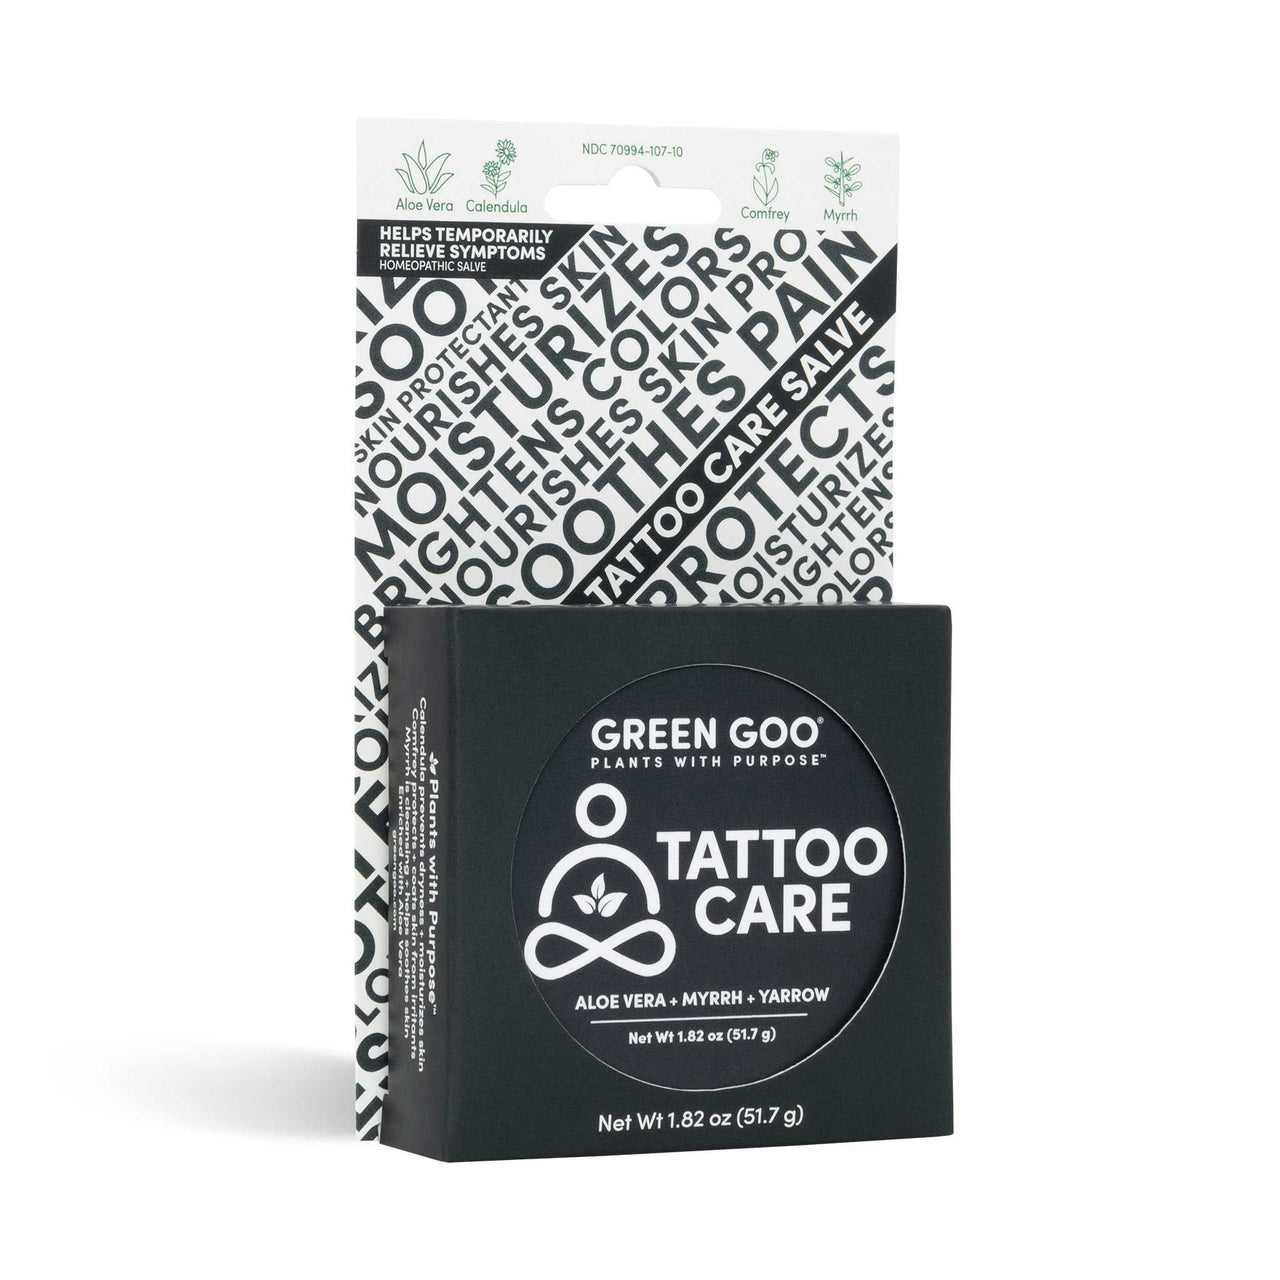 Tattoo Goo Aftercare Products - YouTube